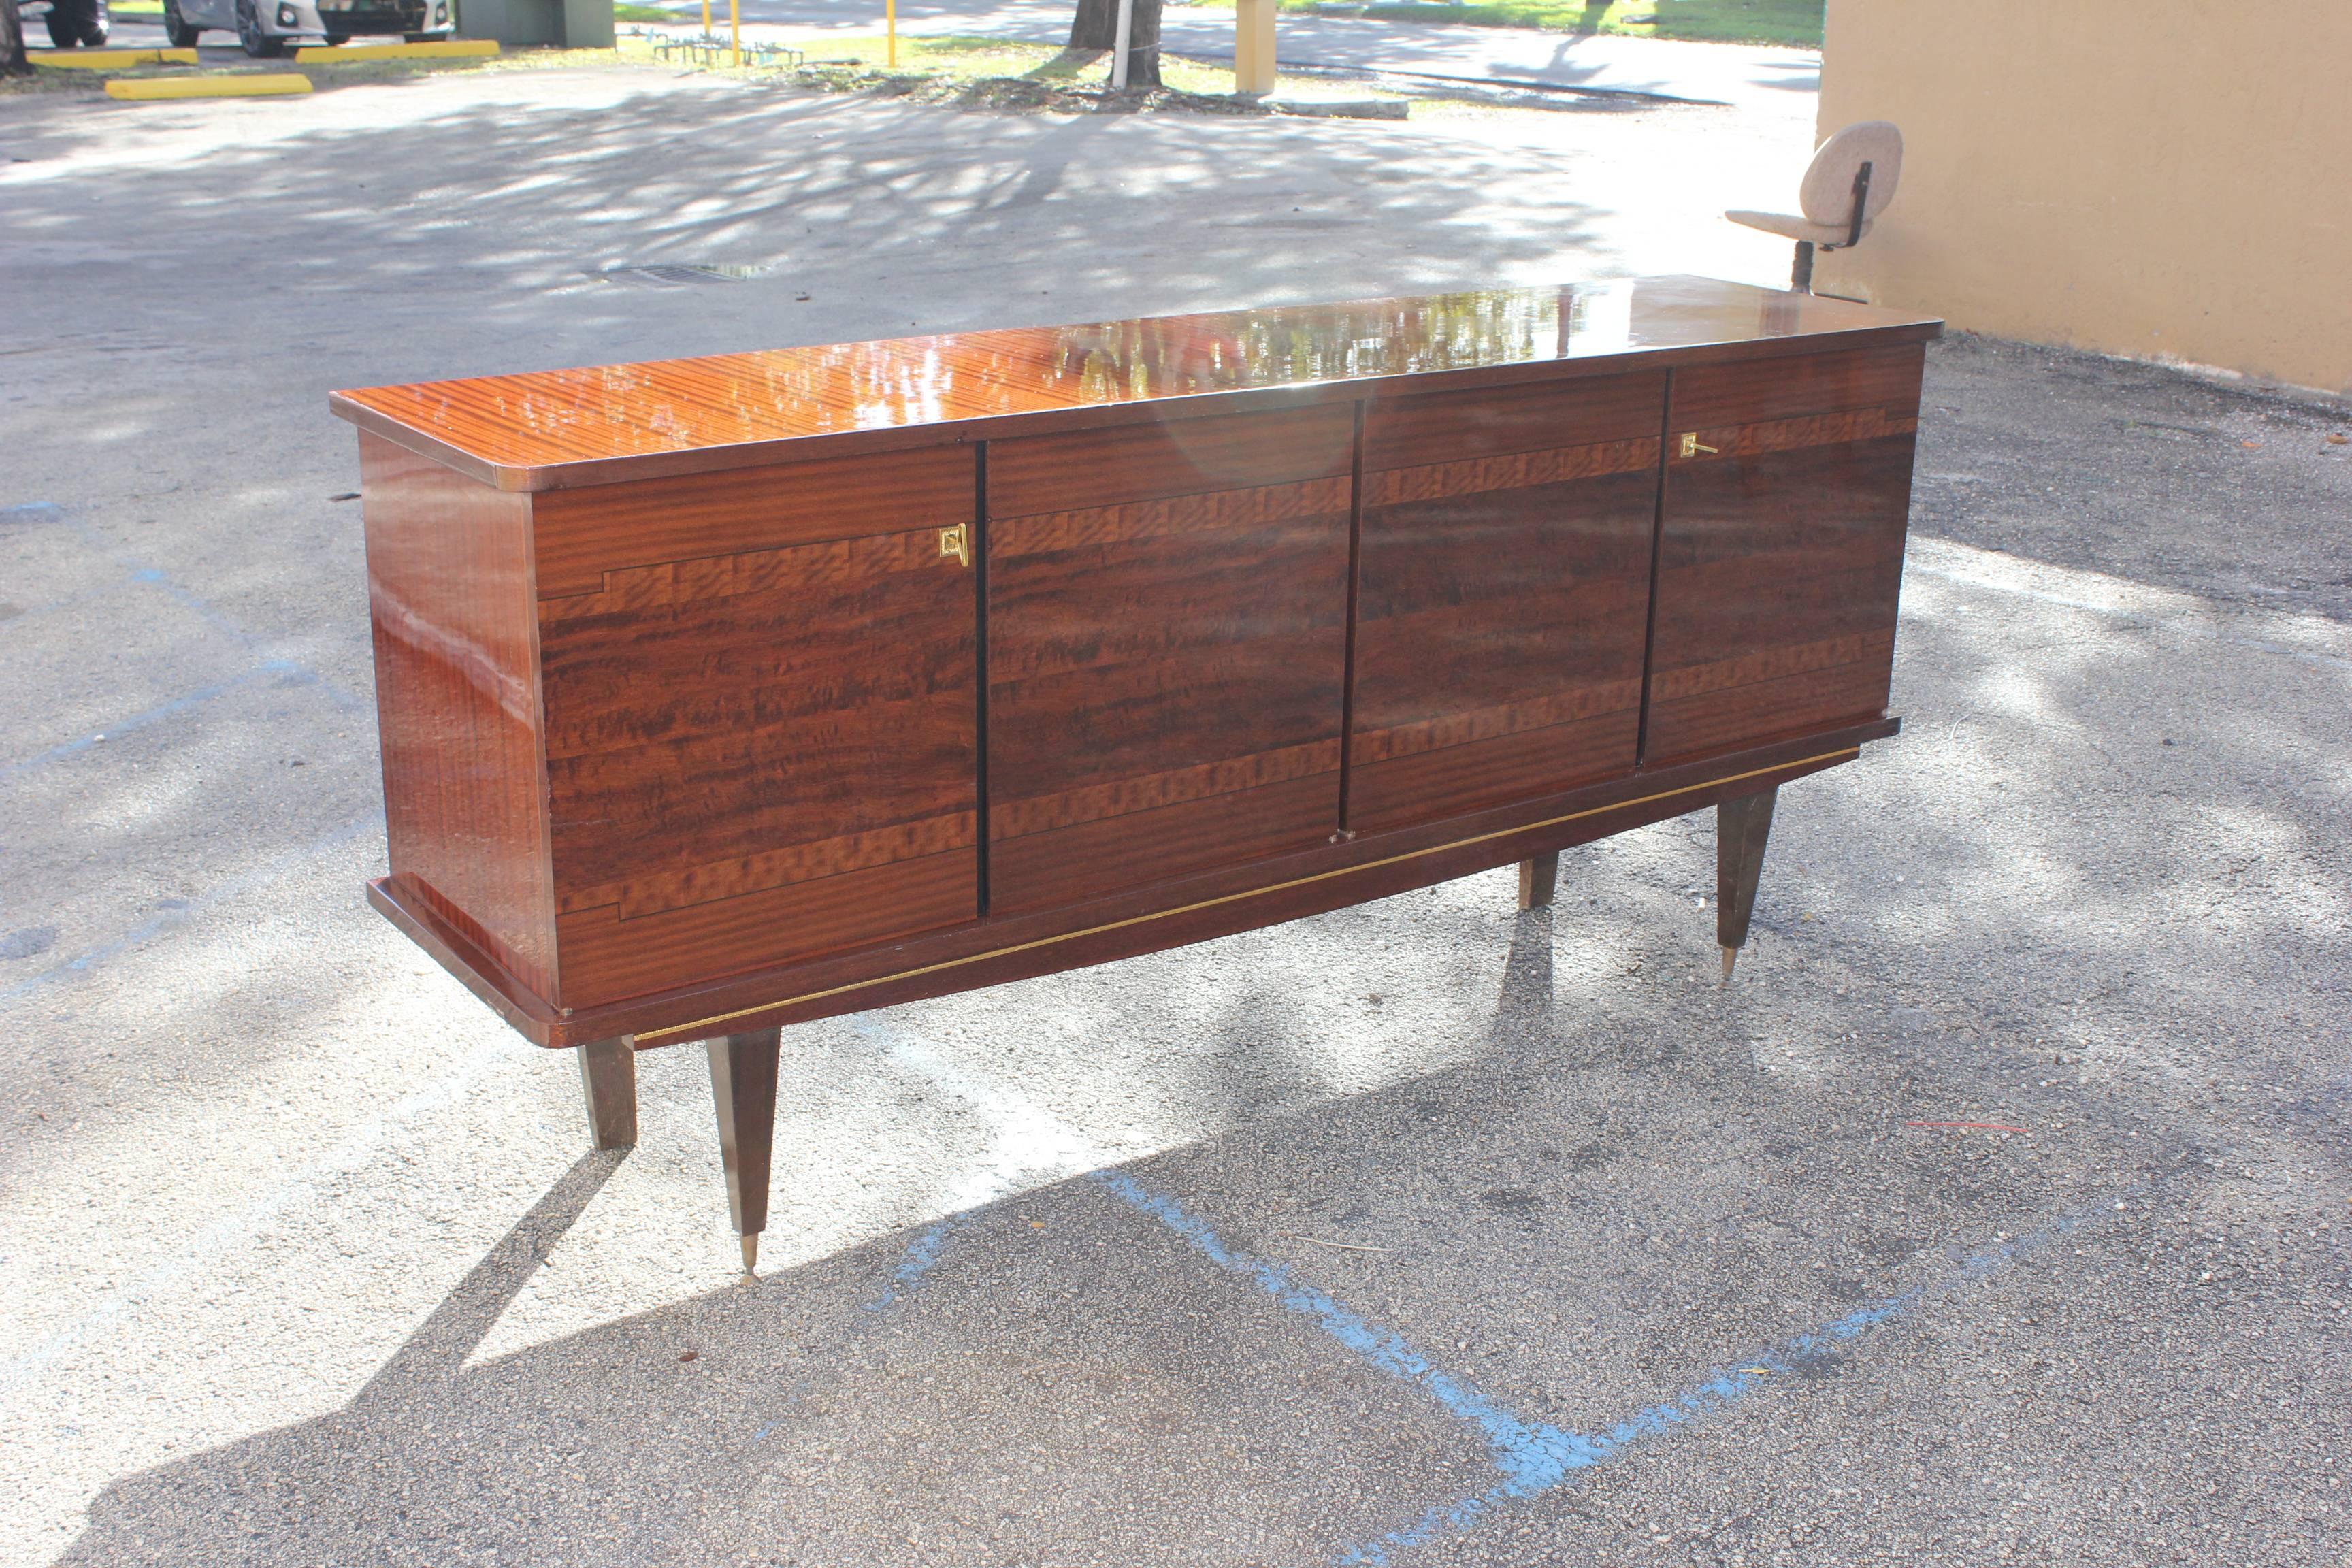 French Art Deco exotic mahogany sideboard or buffet or bar high gloss finish bar section, circa 1940. Please note these buffets can be taken apart to accommodate elevator needs if necessary from France, Paris.